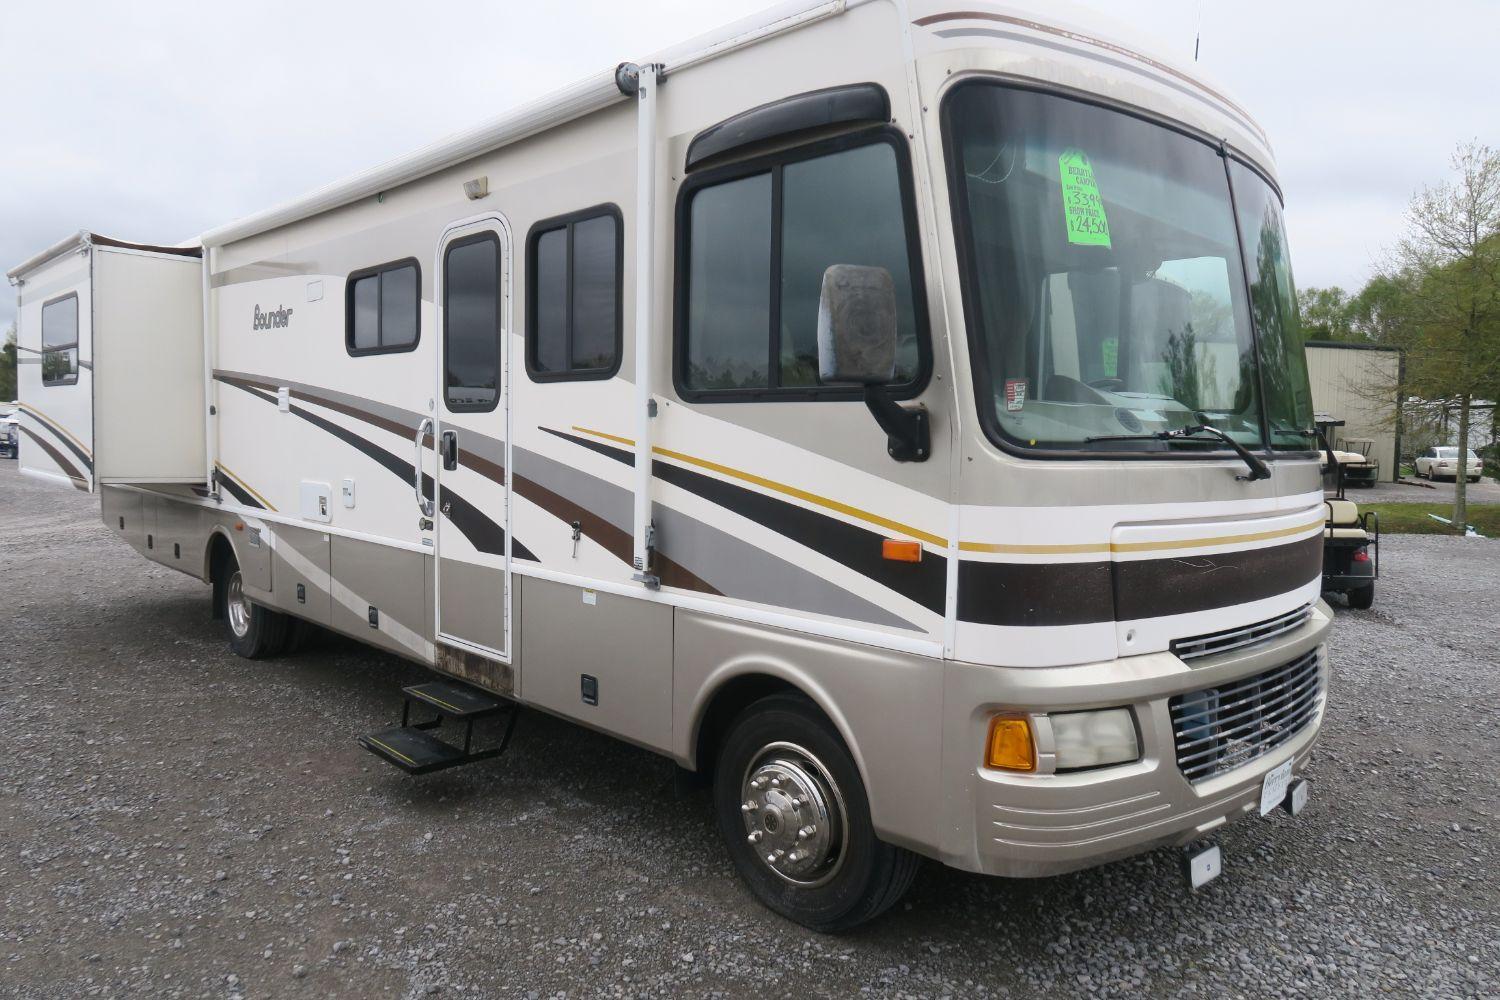 The RV for sale is a Used 2005 Bounder Standard Class A Gas by Fleetwood RV...